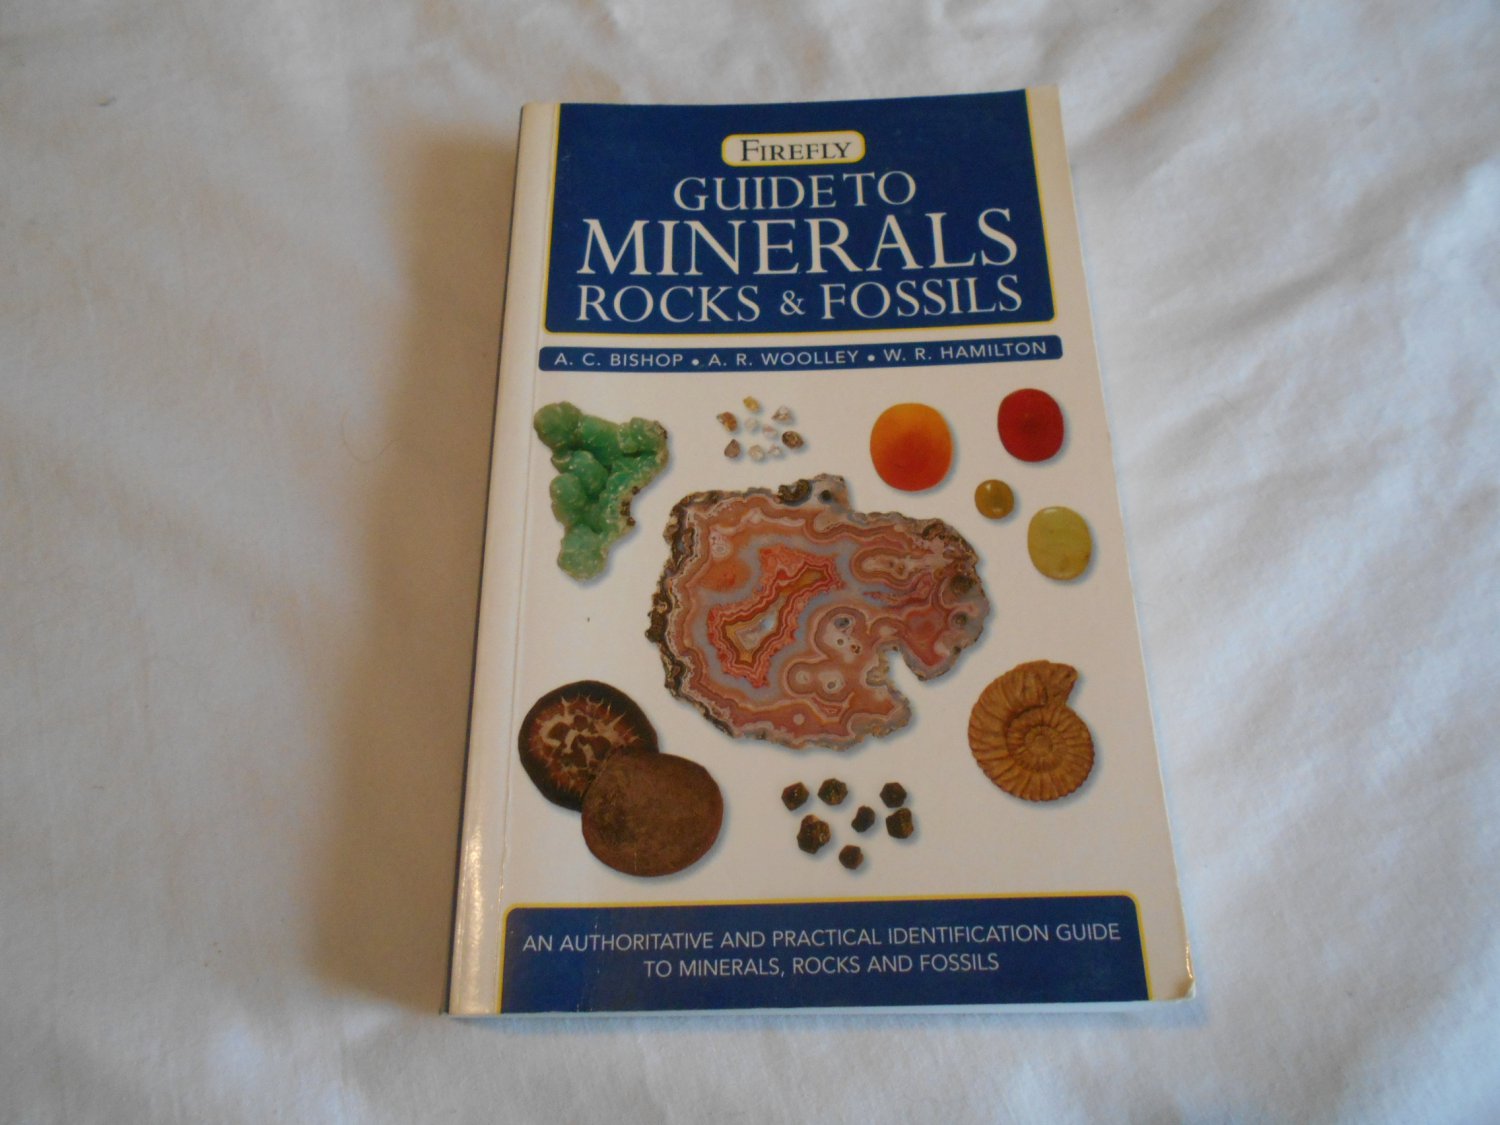 Guide to Minerals, Rocks and Fossils by W. R. Hamilton, A. C. A. R. Woolley (2005) (B30)